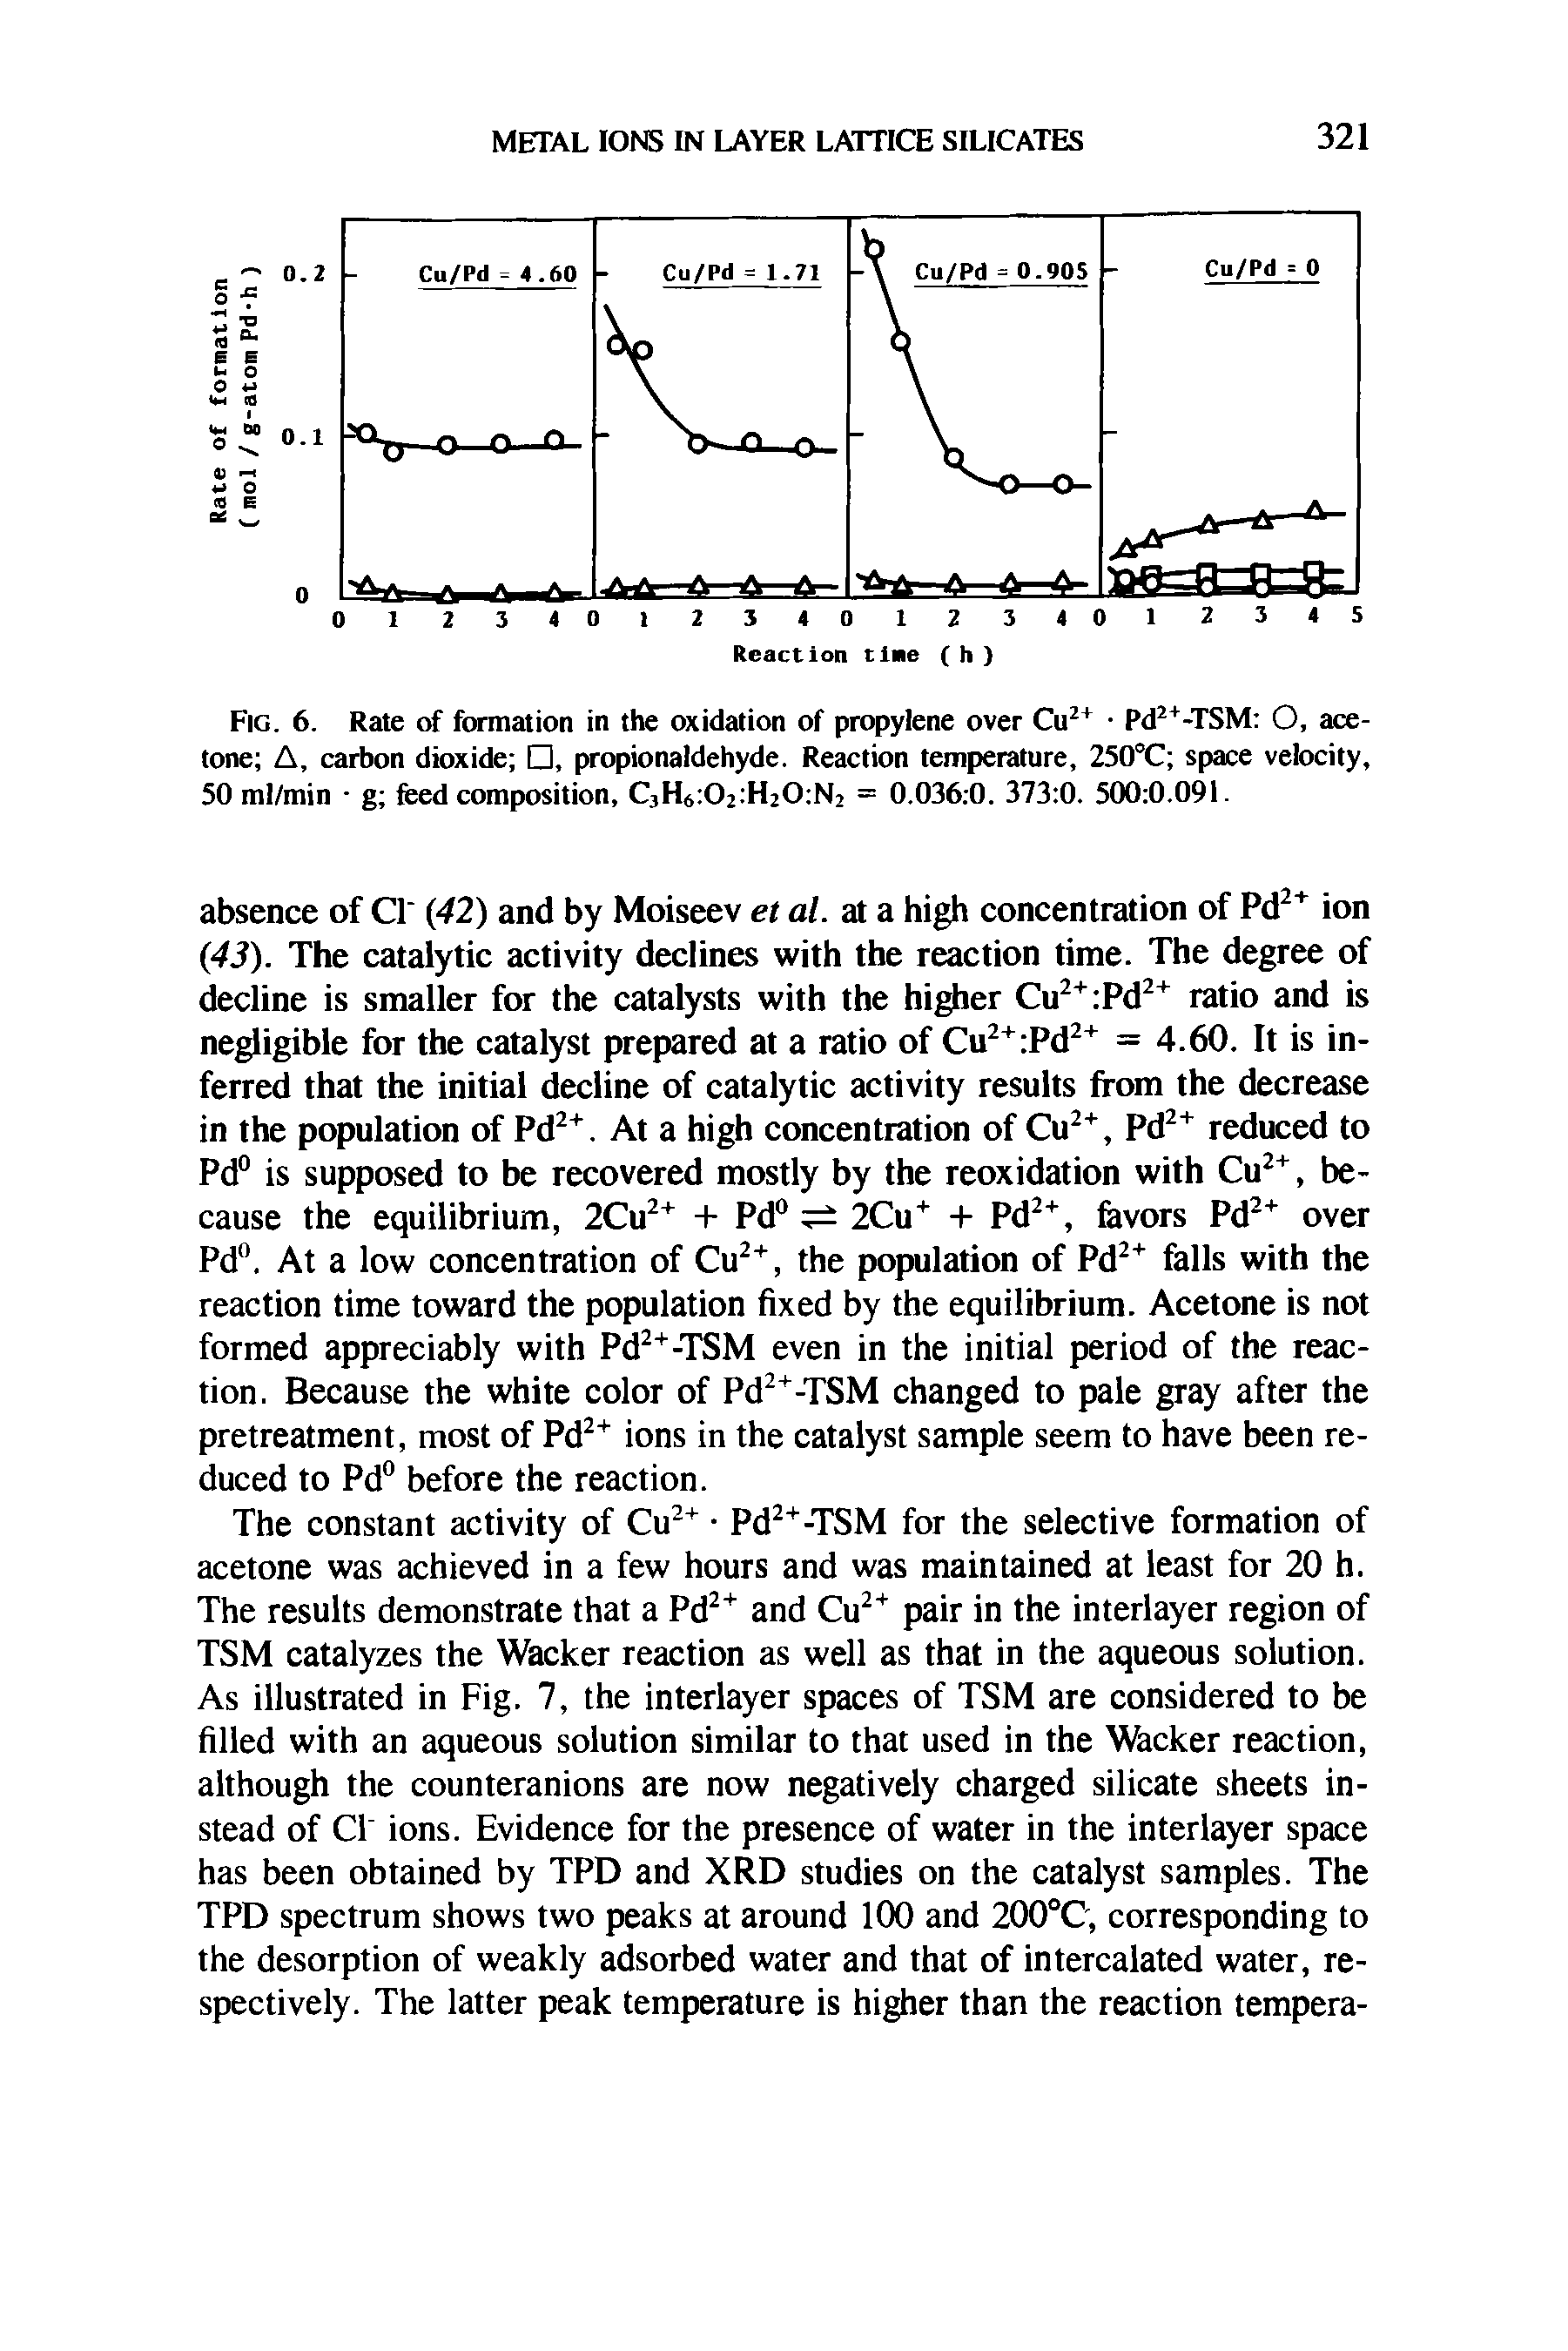 Fig. 6. Rate of formation in the oxidation of propylene over Cu + Pd -TSM O, acetone A, carbon dioxide , propionaldehyde. Reaction temperature, 250°C space velocity, 50 ml/min g feed composition, C3H6 02 H20 N2 = 0.036 0. 373 0. 500 0.091.